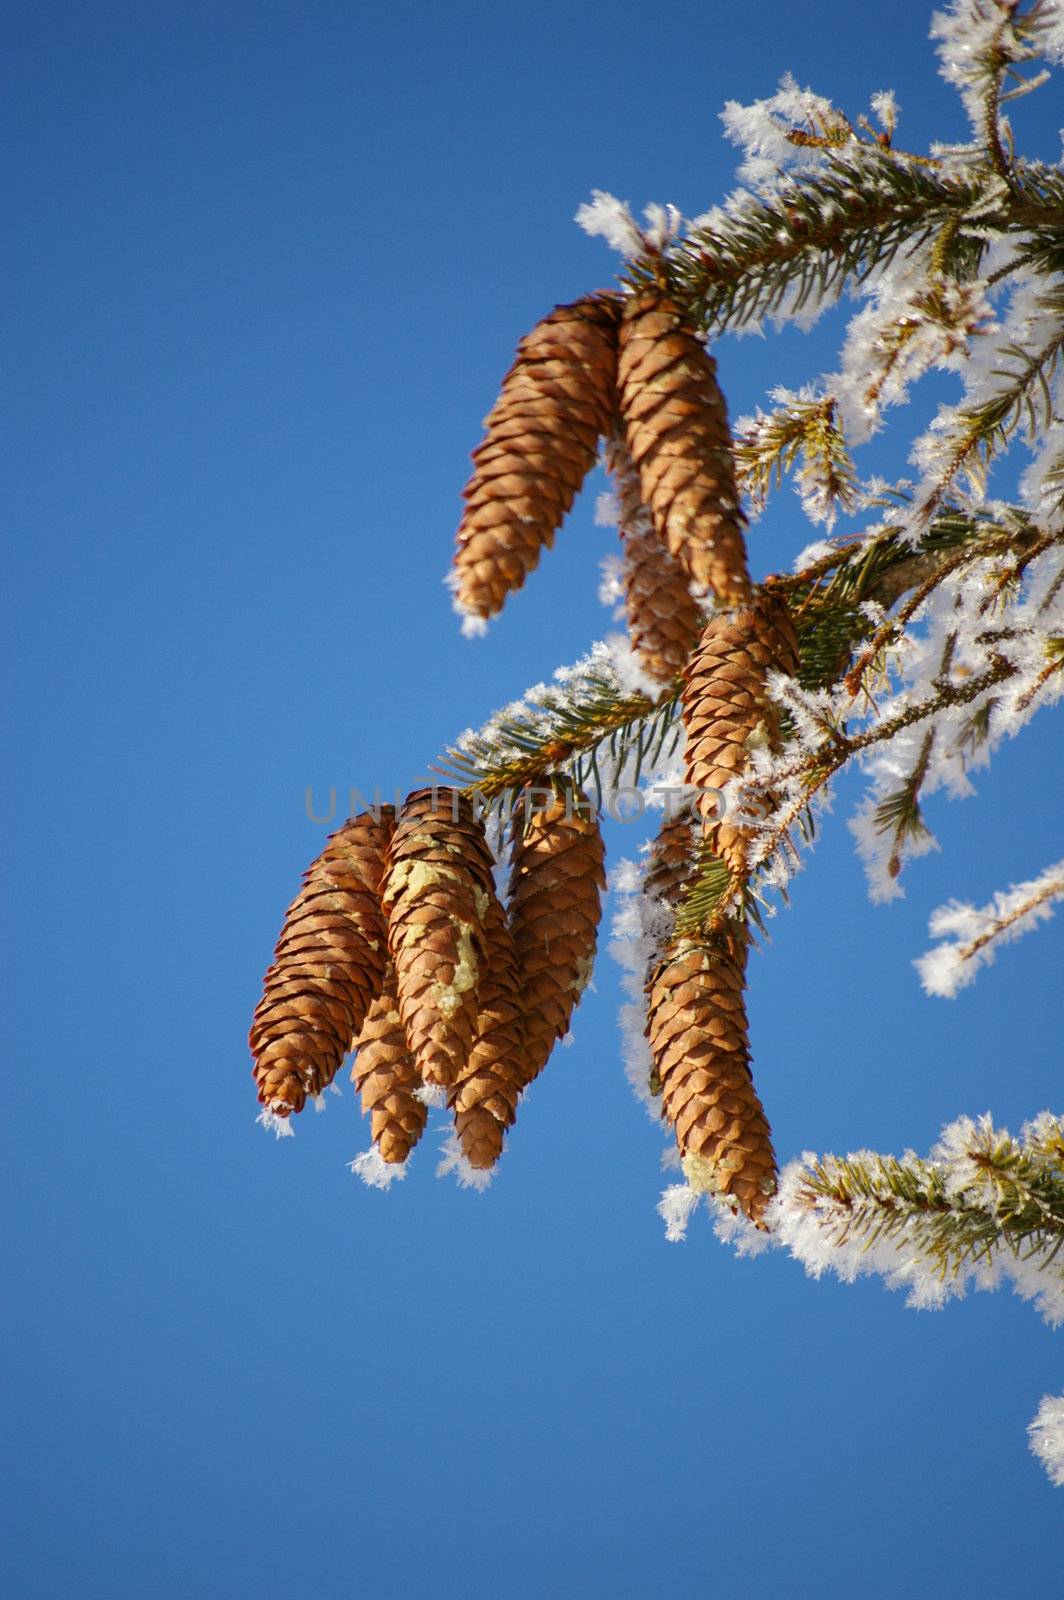 a fir cone on a branche in winter